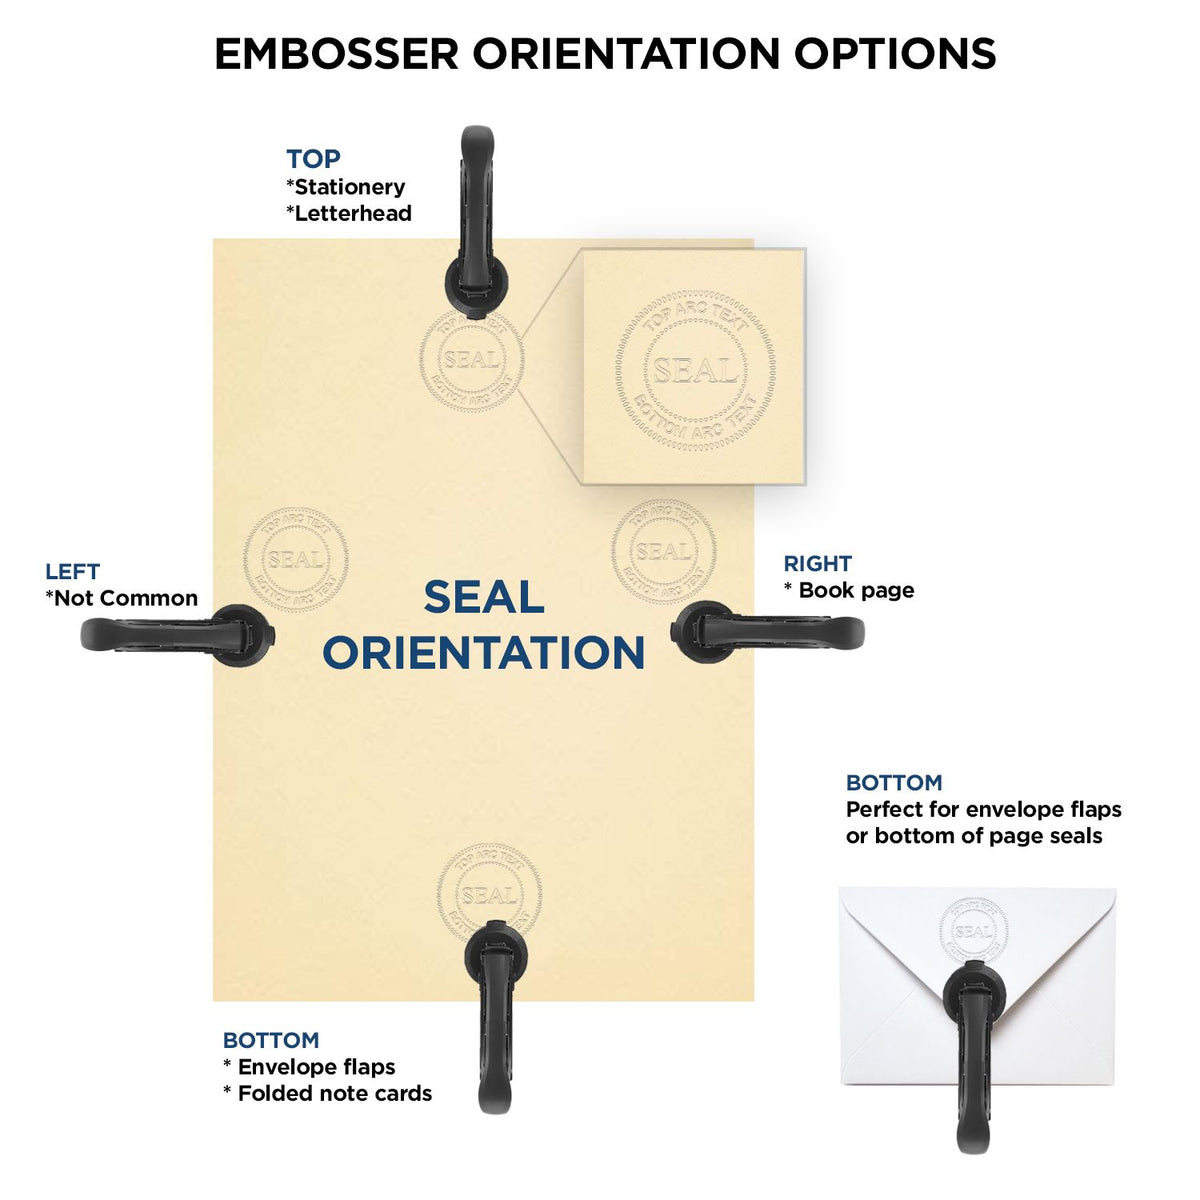 An infographic for the Long Reach Virginia PE Seal showing embosser orientation, this is showing examples of a top, bottom, right and left insert.